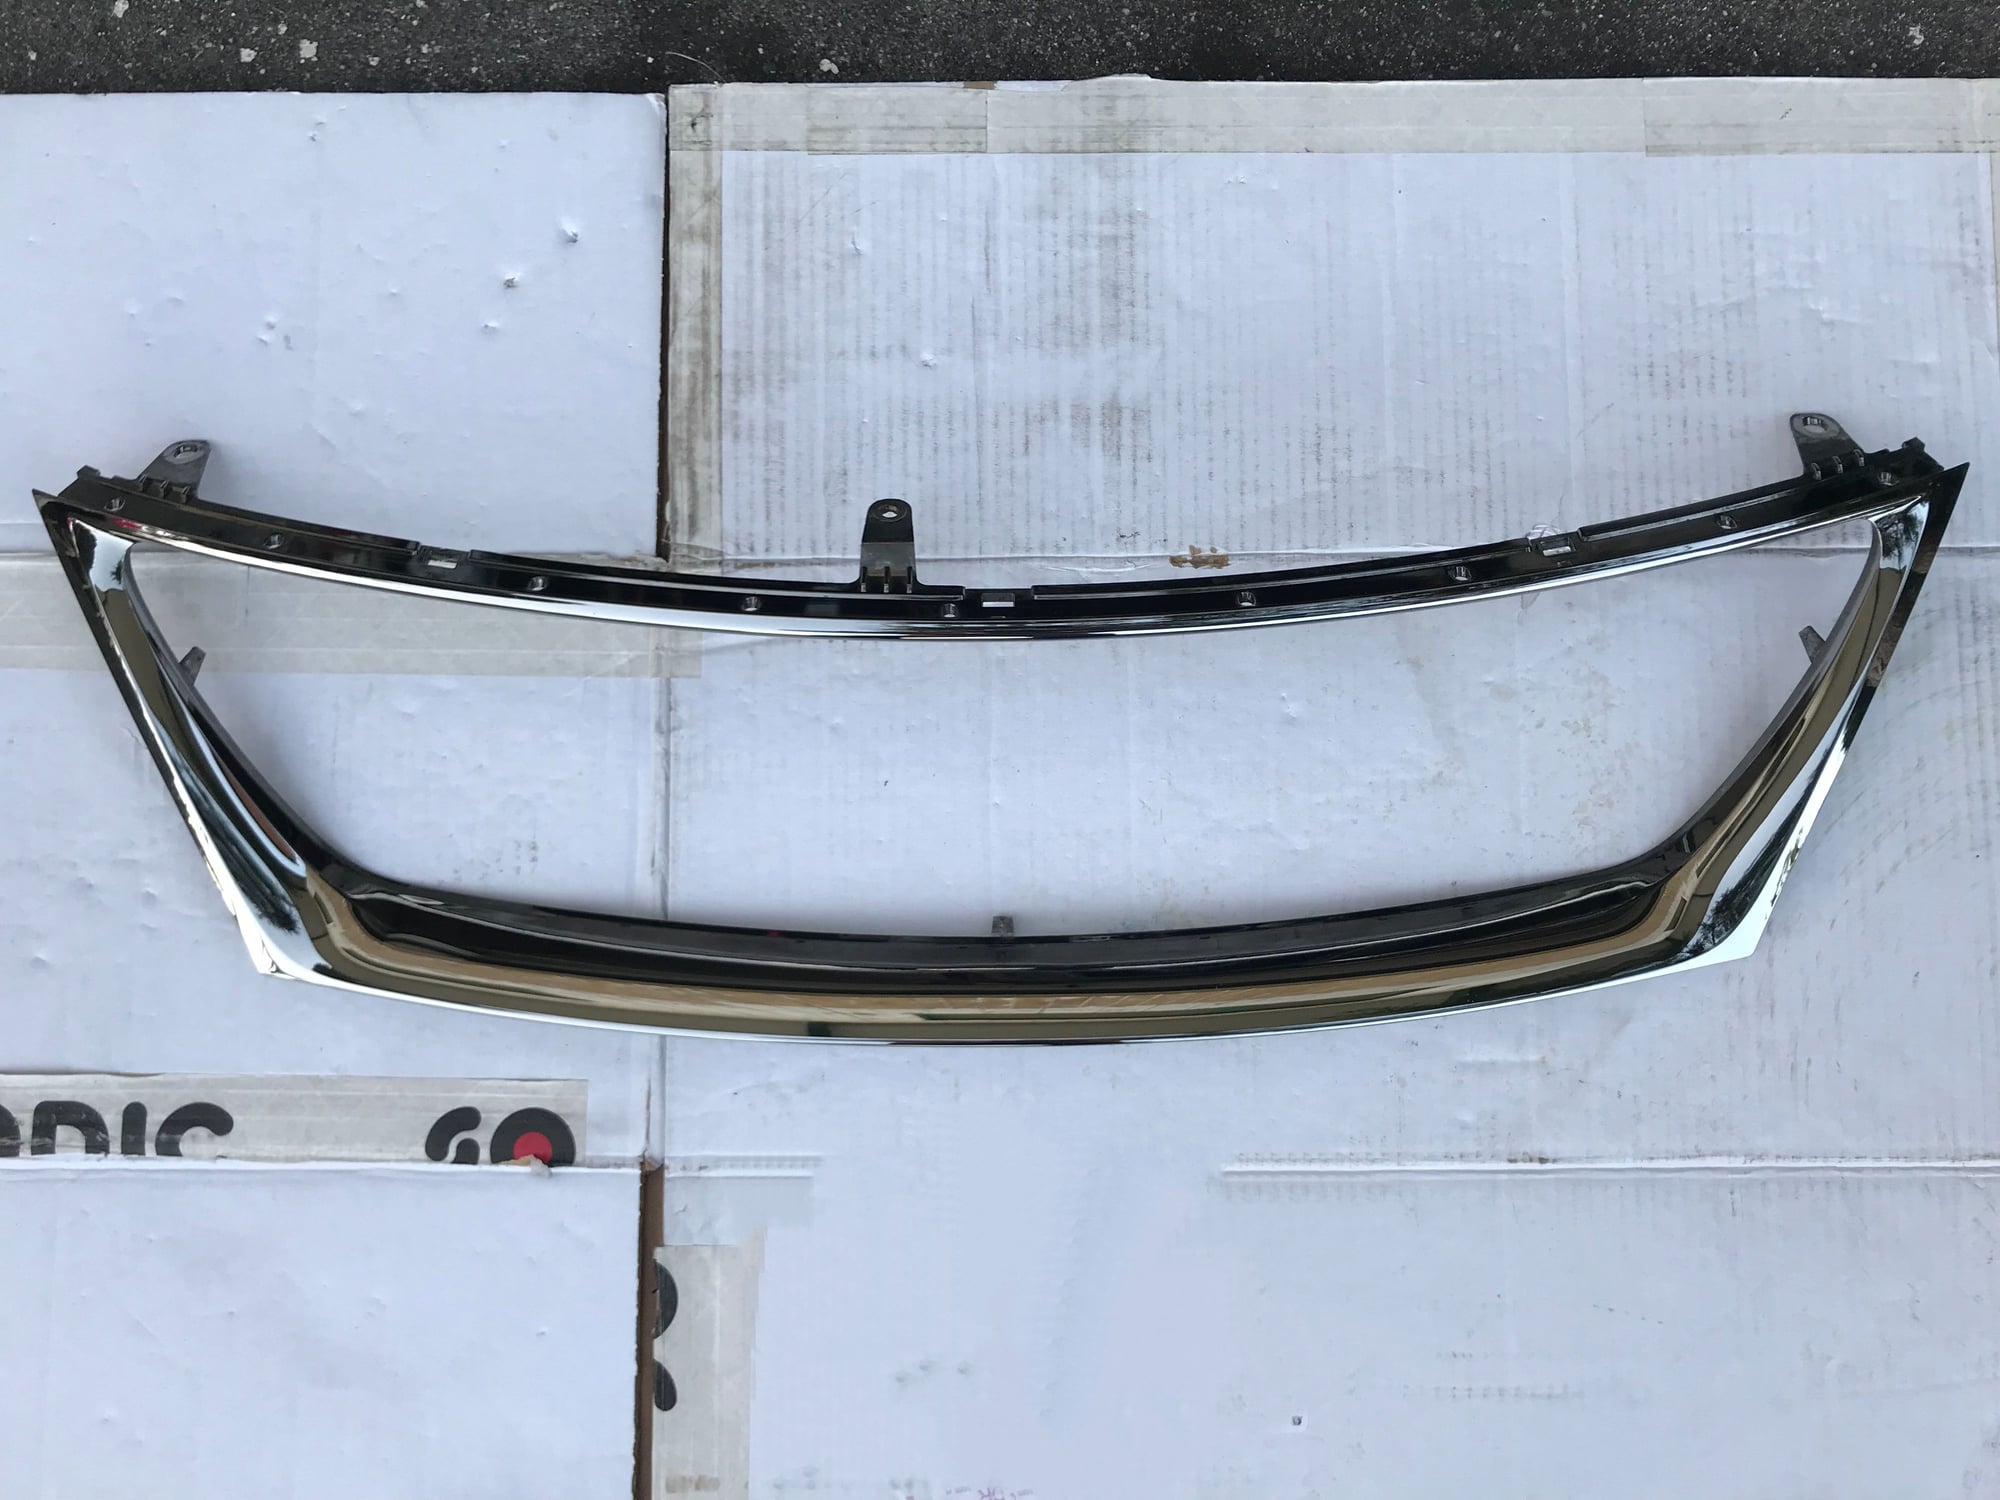 2016 Audi A3 Sportback e-tron - OEM IS F Grille - Exterior Body Parts - $50 - Vancouver, BC V7N3R3, Canada